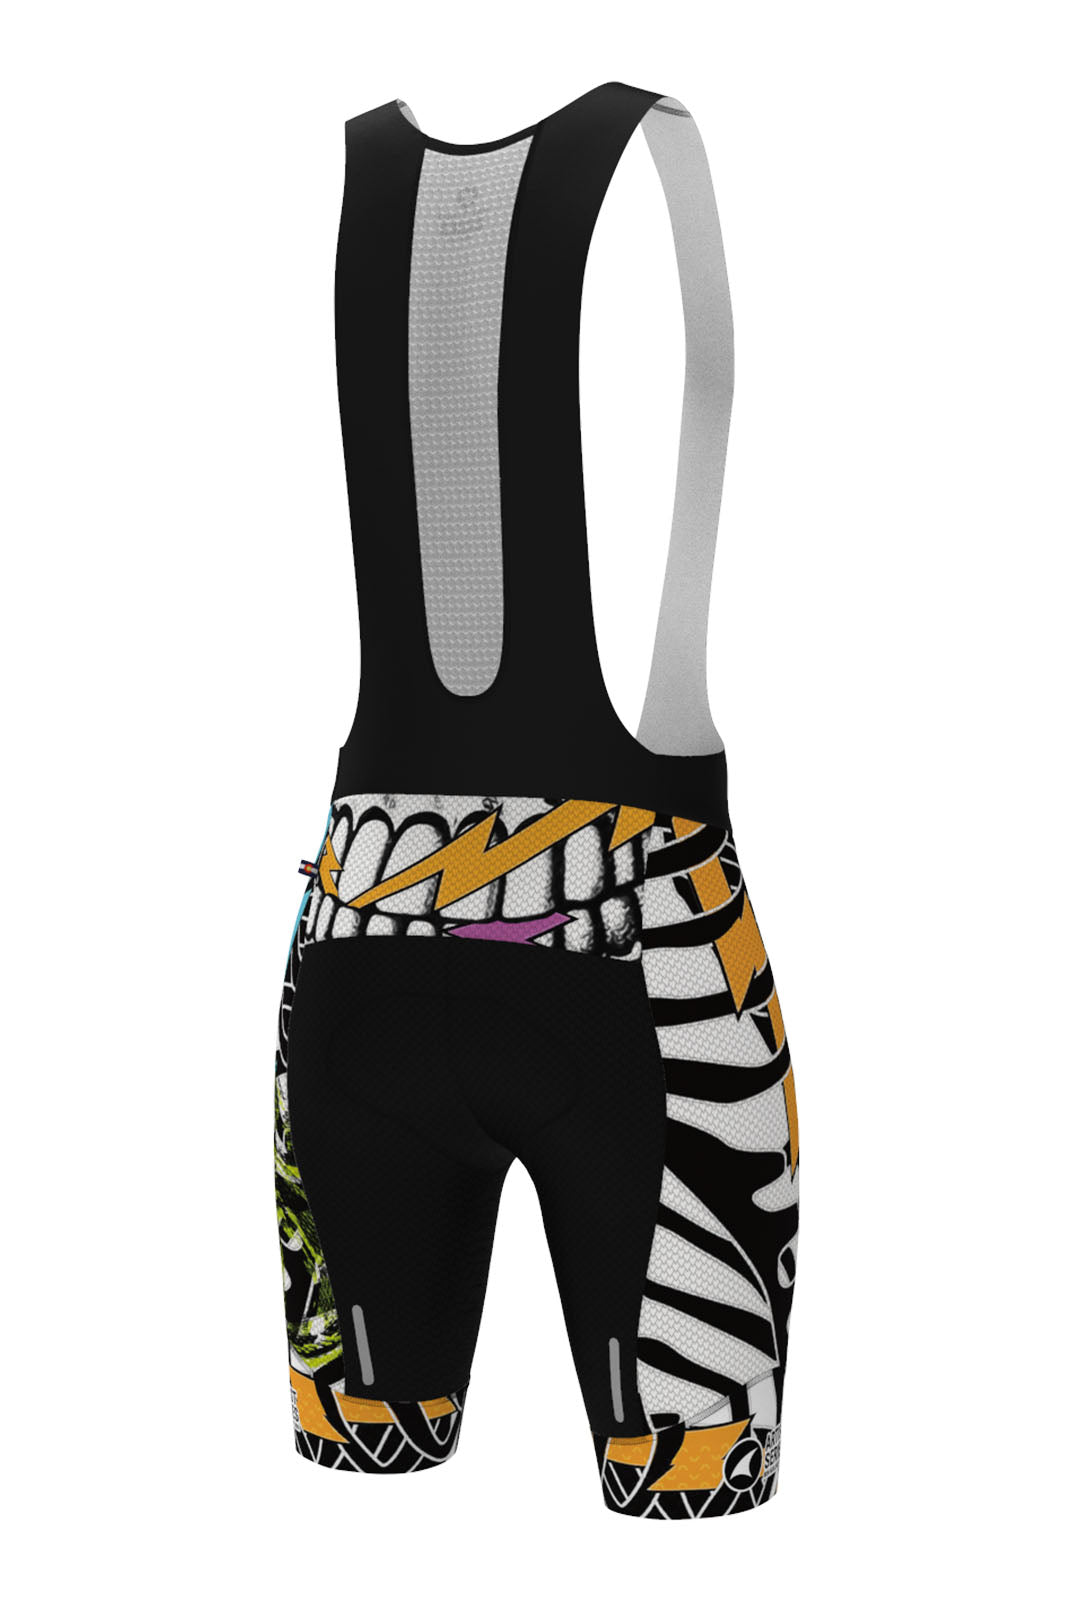 Men's Unique Cycling Bibs - Best Served Cold White Back View